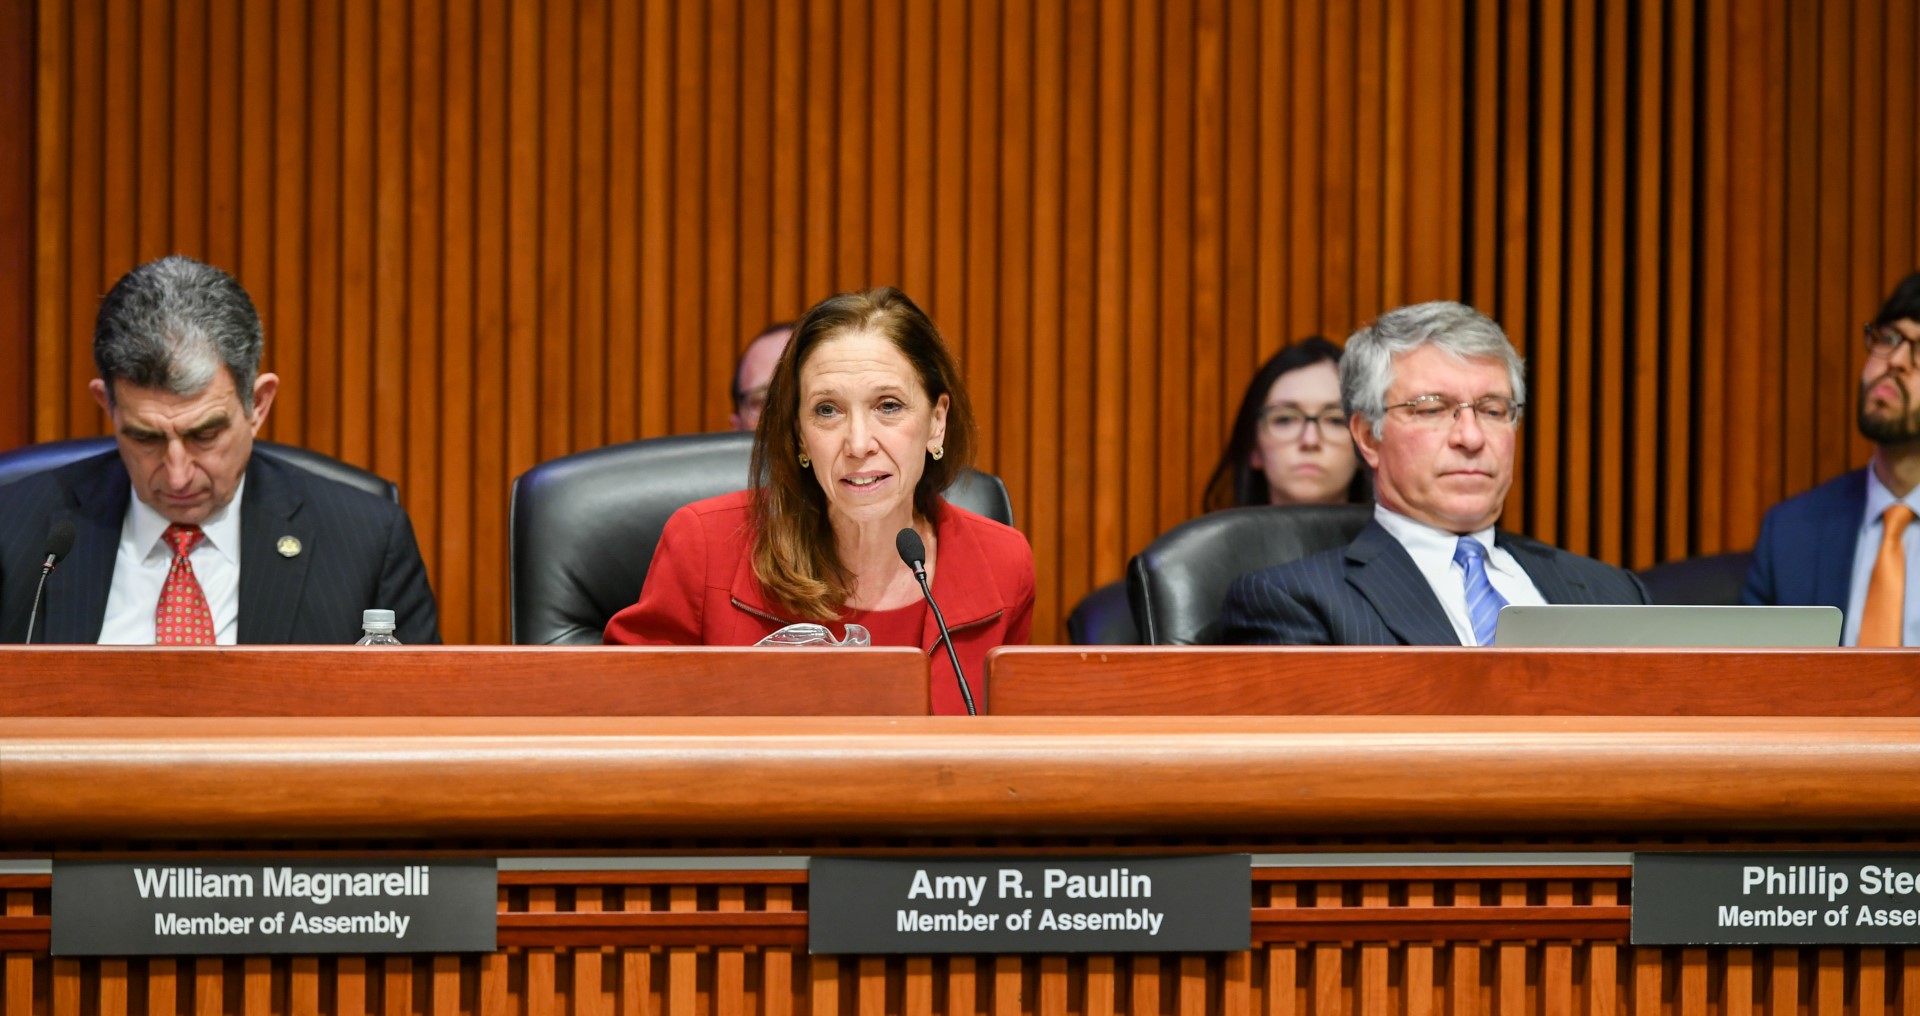 Chair Amy Paulin of the Assembly Committee on Corporations, Authorities and Commissions at an Assembly Budget Hearing on Transportation and the MTA.